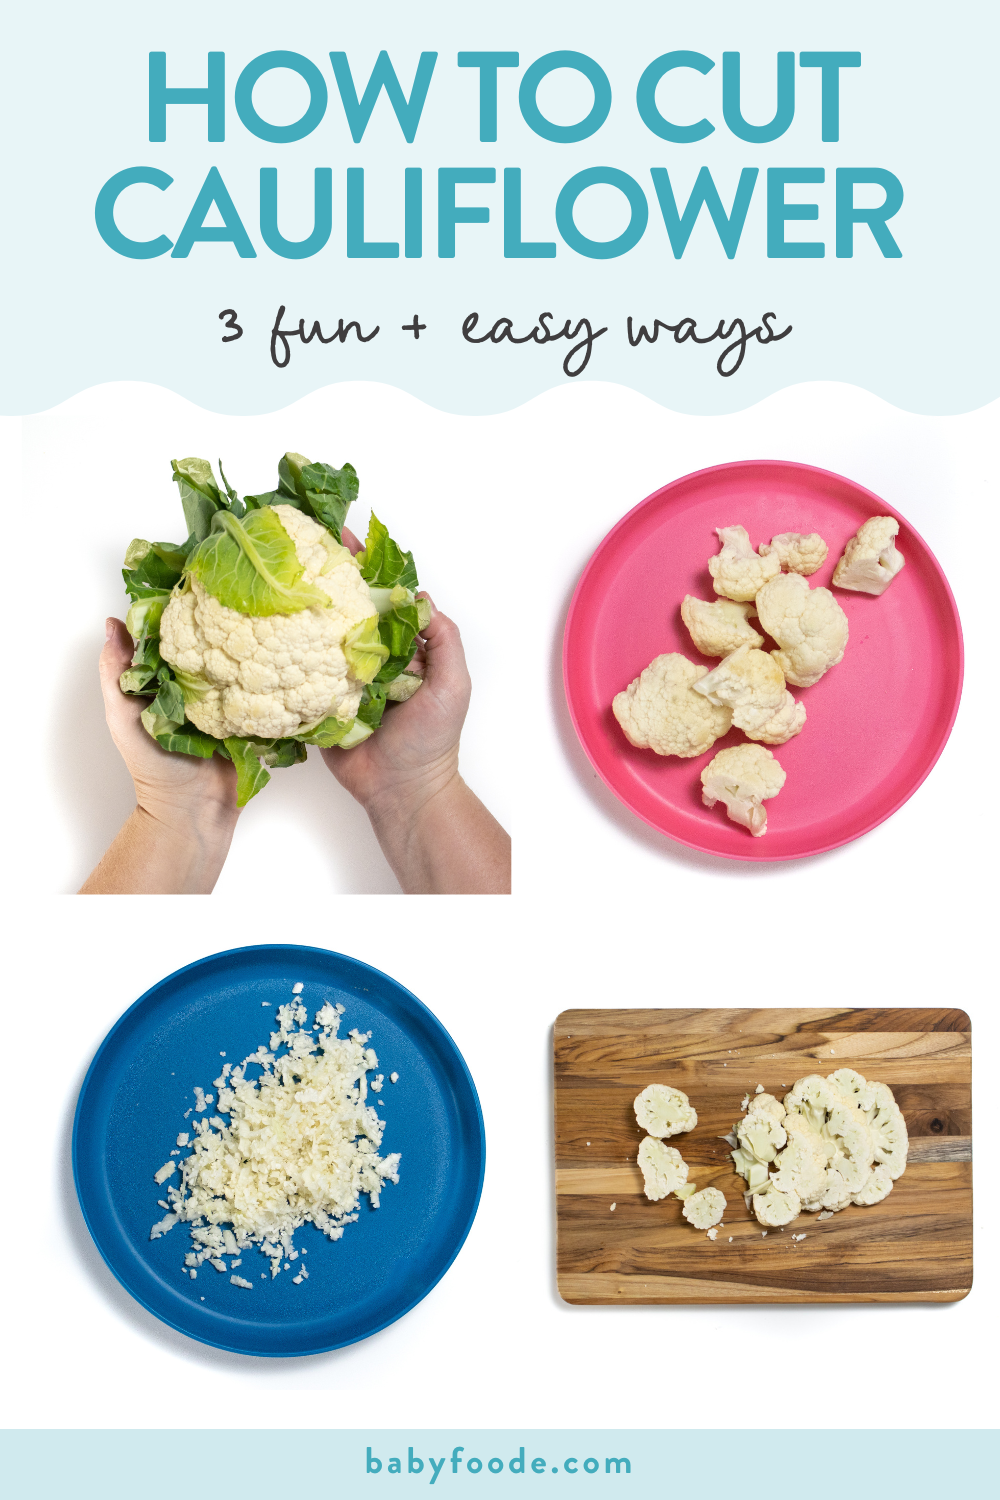 graphic for post - how to cut cauliflower. Images are in a grid against a white background - hands holding a cauliflower, pink plate with florets, blue plate with riced cauliflower and a cutting board with cauliflower steaks.  